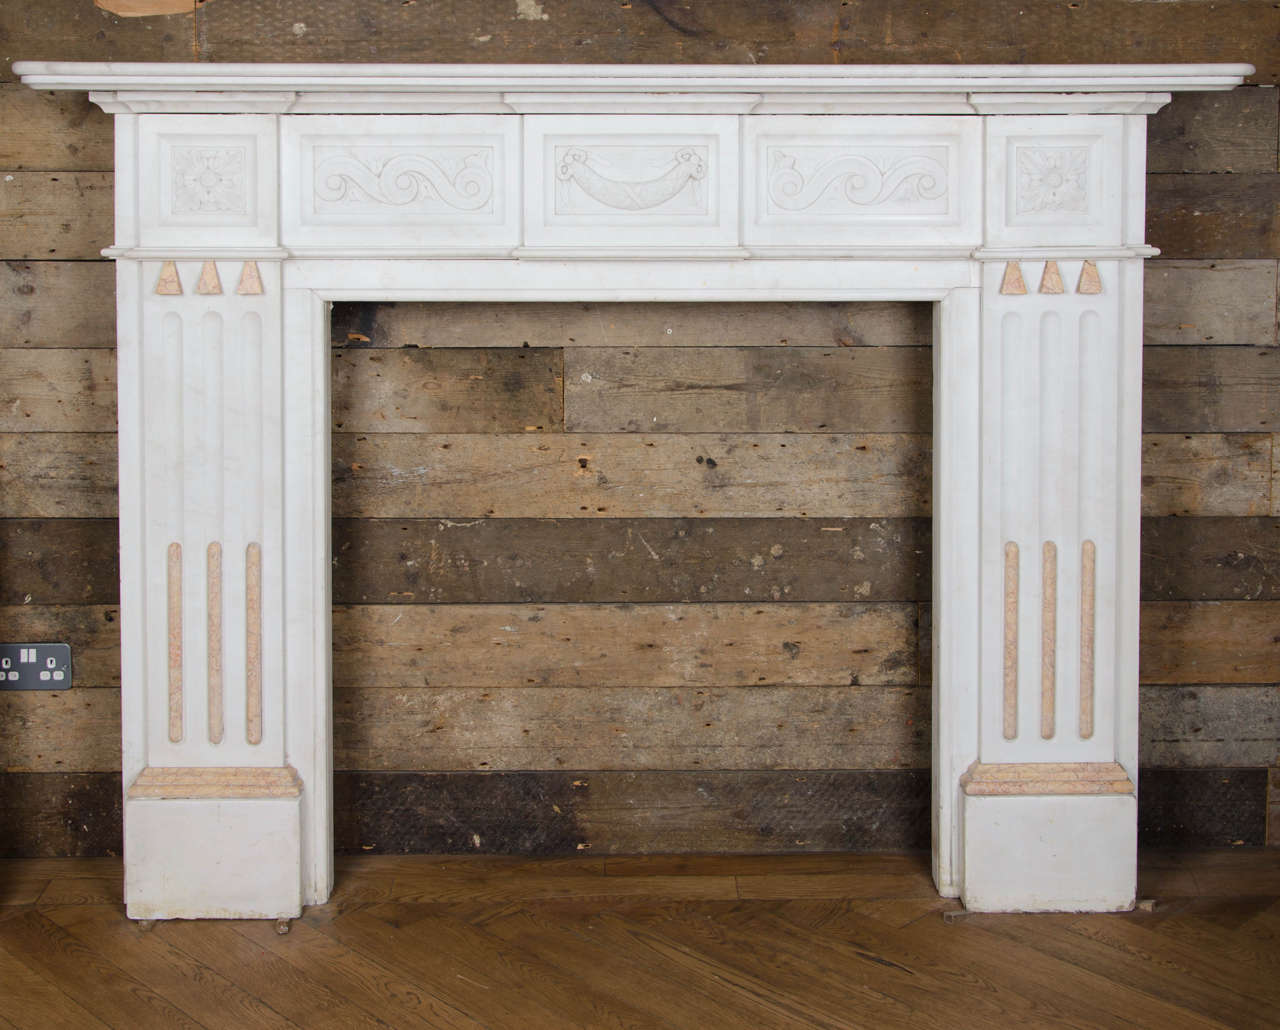 A striking and opulent Victorian fireplace surround made from statuary marble. This antique marble fire surround has elegant, fluted jambs that feature contrasting sienna marble inlay. The frieze has a beautiful, carved vitruvian scroll decoration